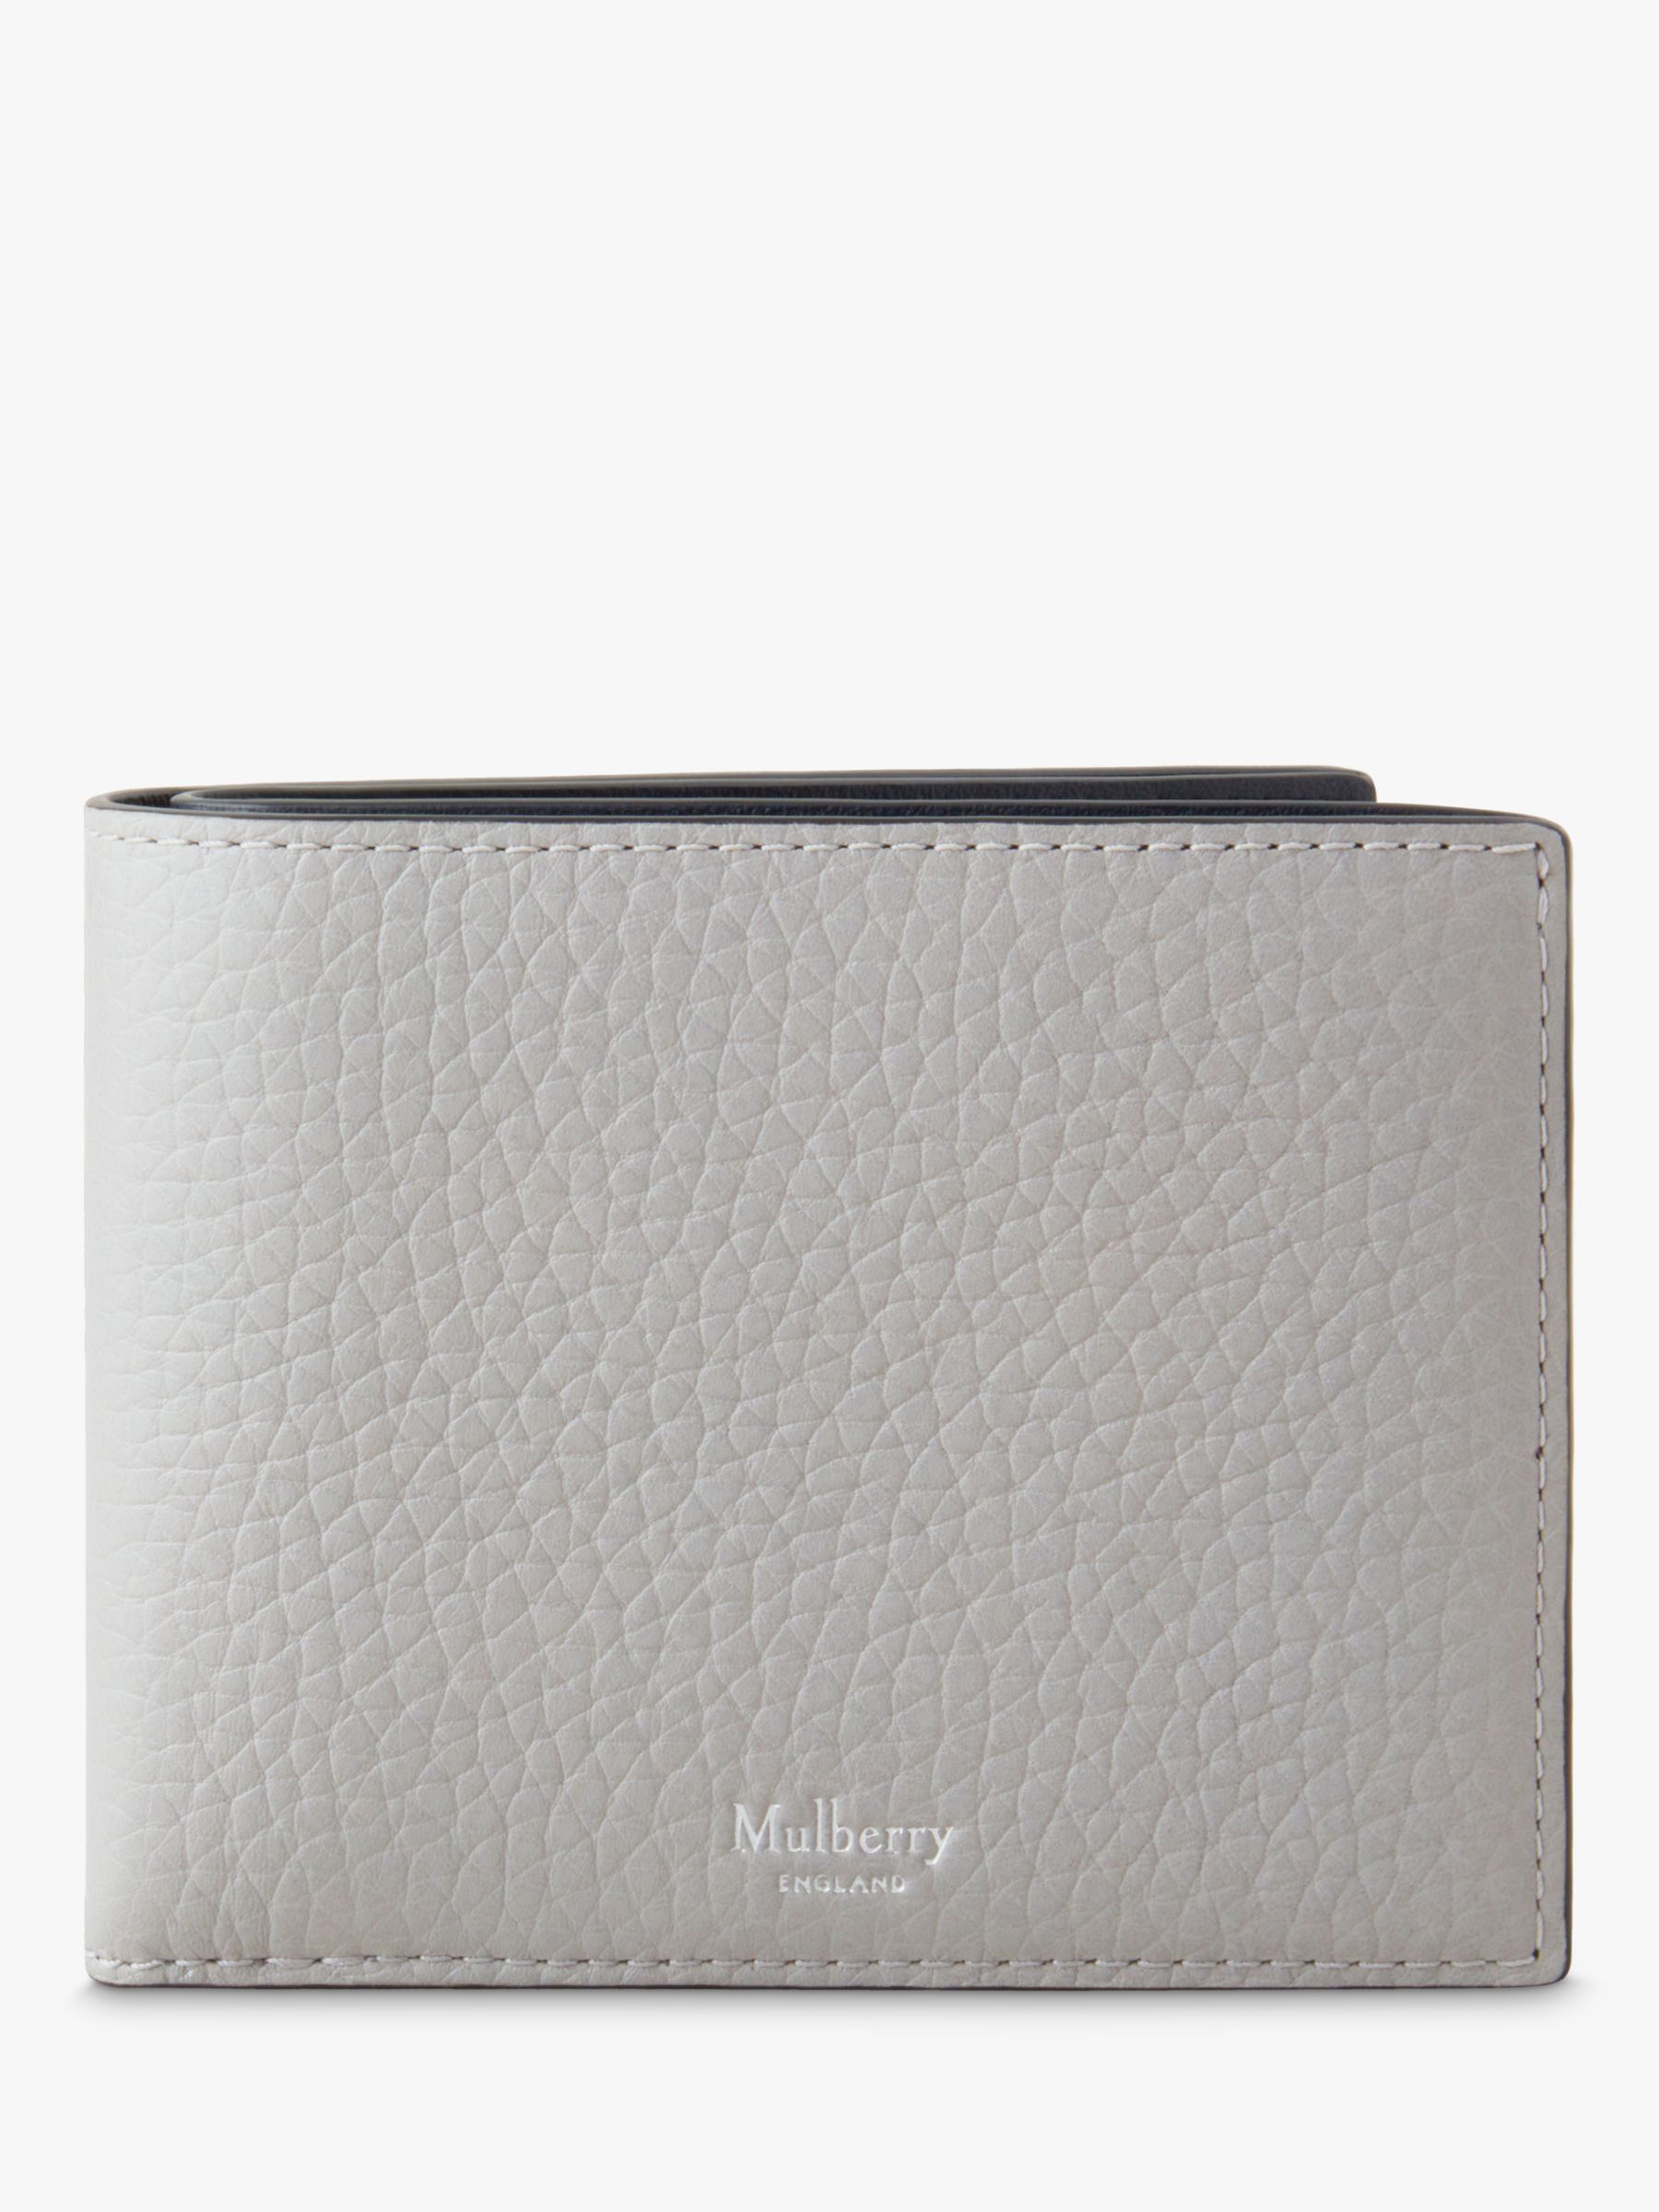 Mulberry Eight Card Heavy Grain Leather Wallet, Pale Grey